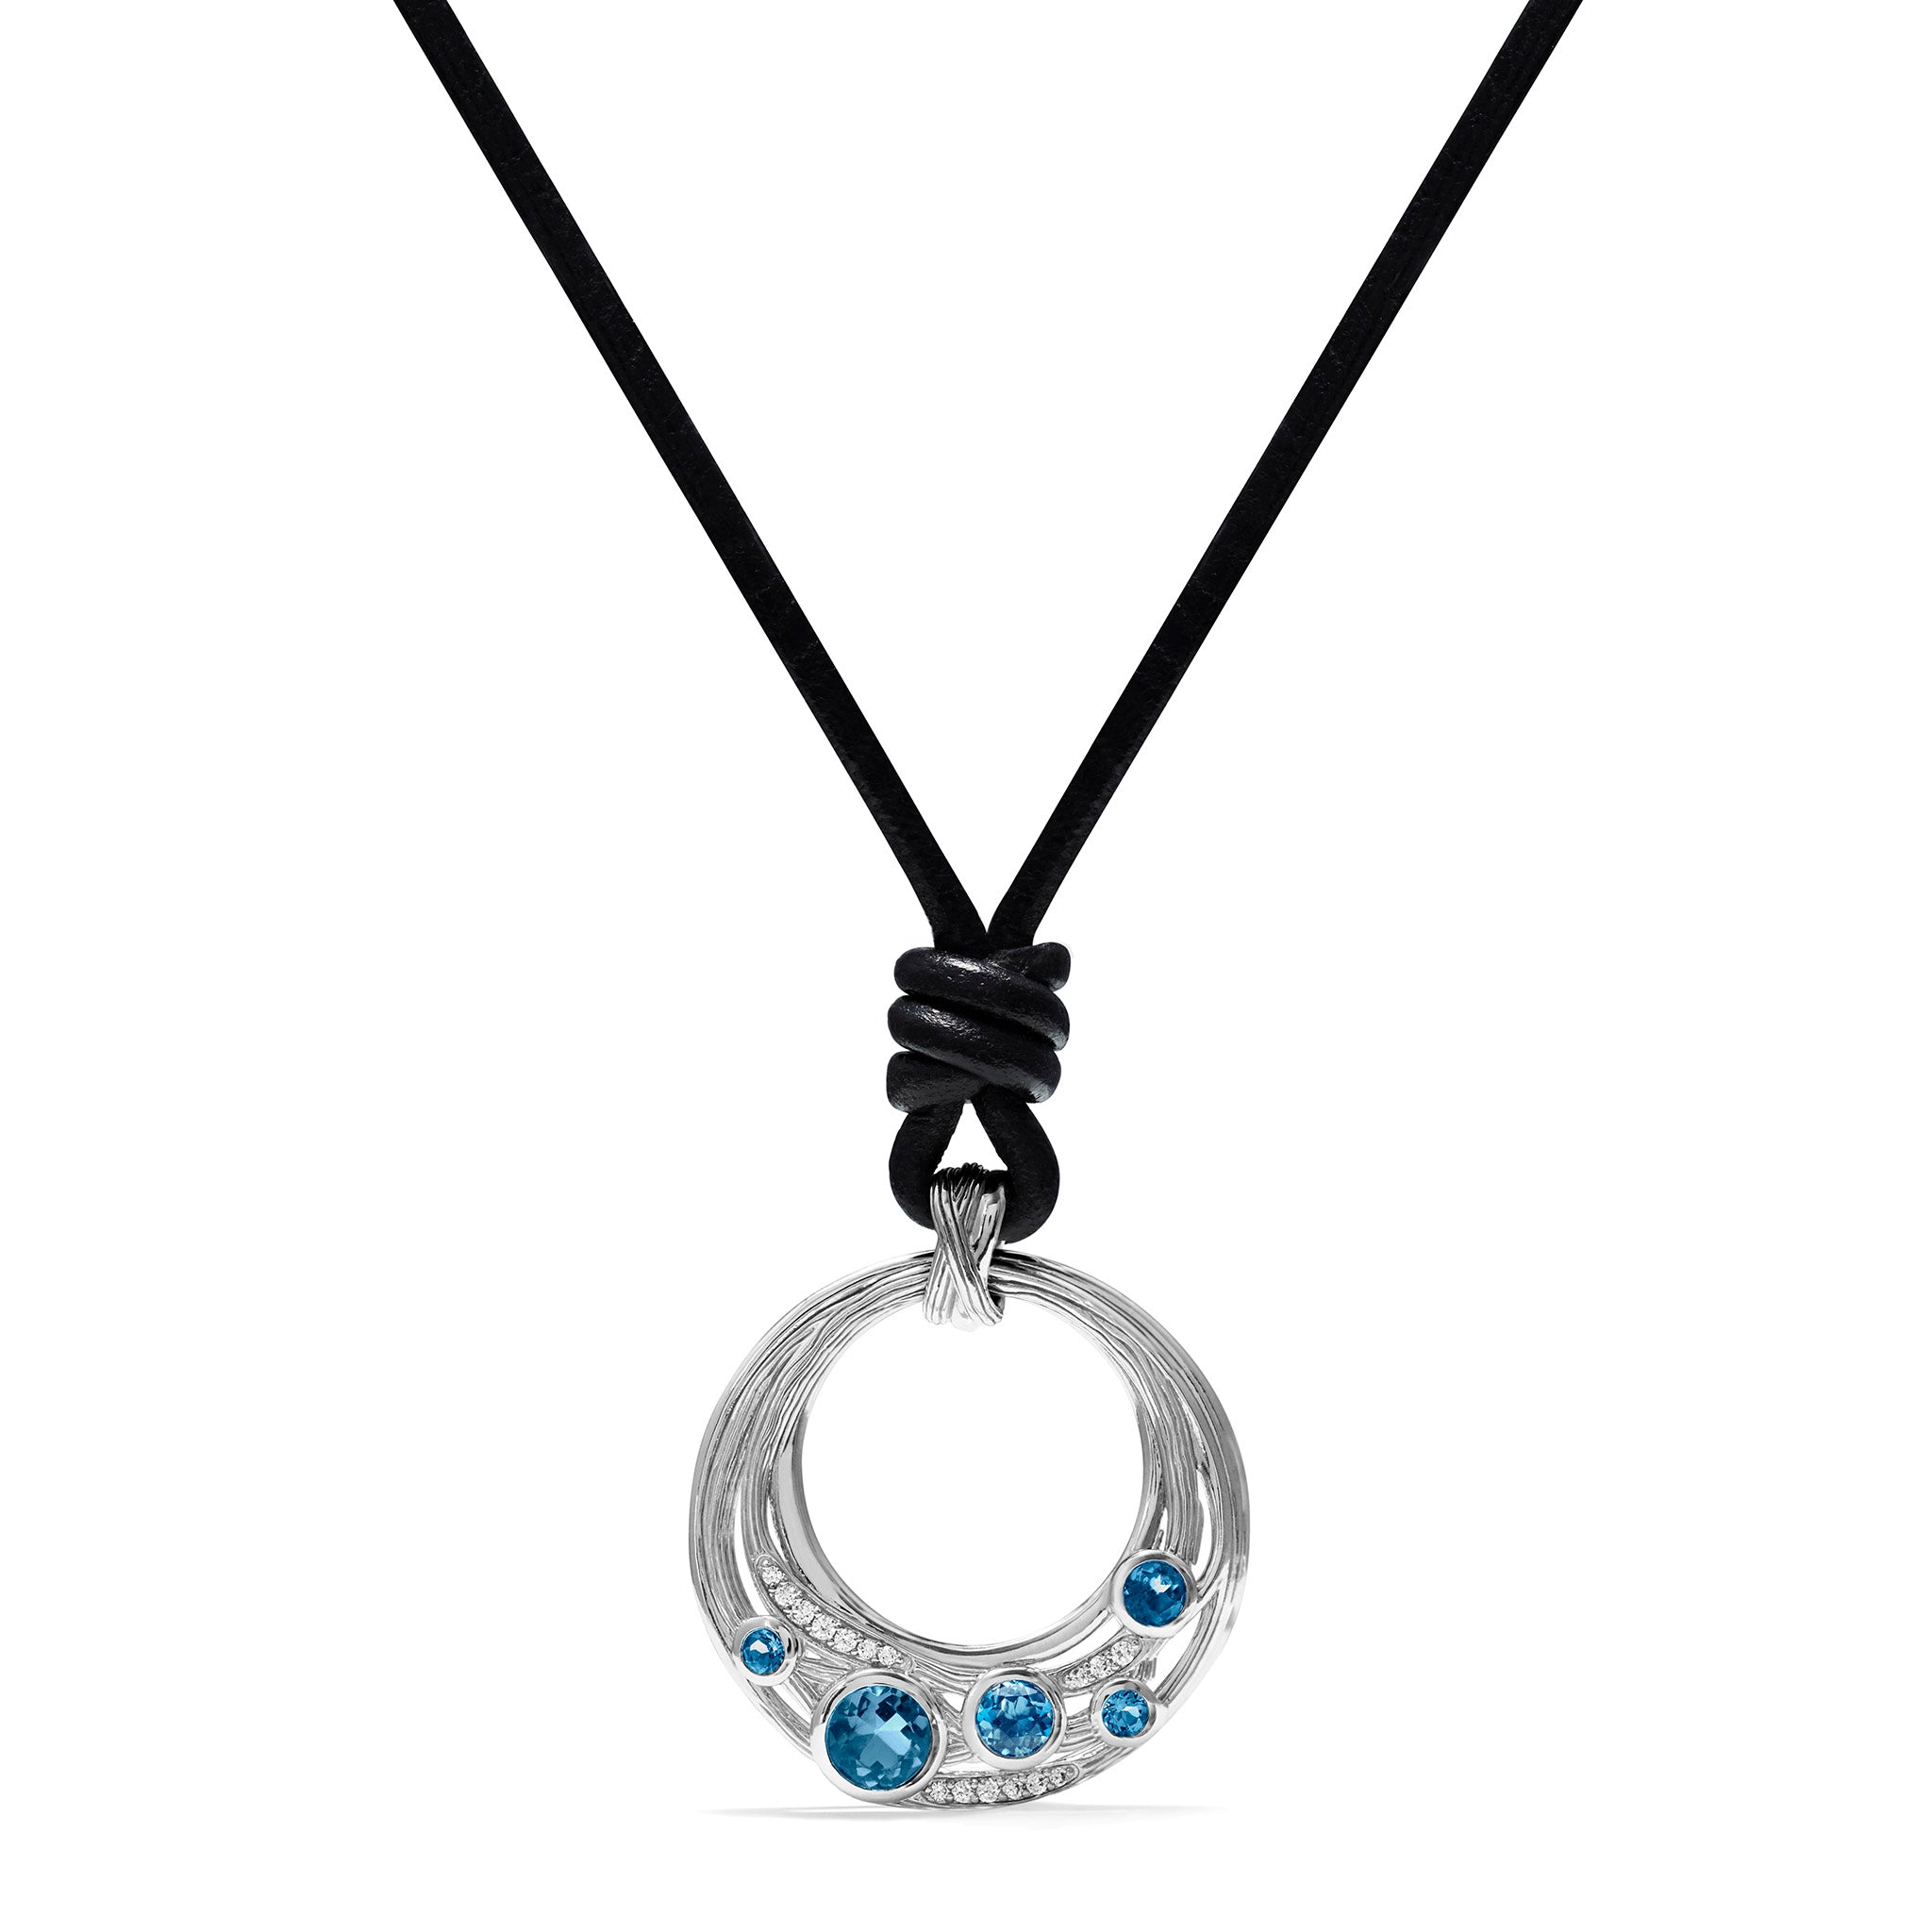 Santorini Long Black Leather Cord Necklace With London Blue Topaz And Diamonds